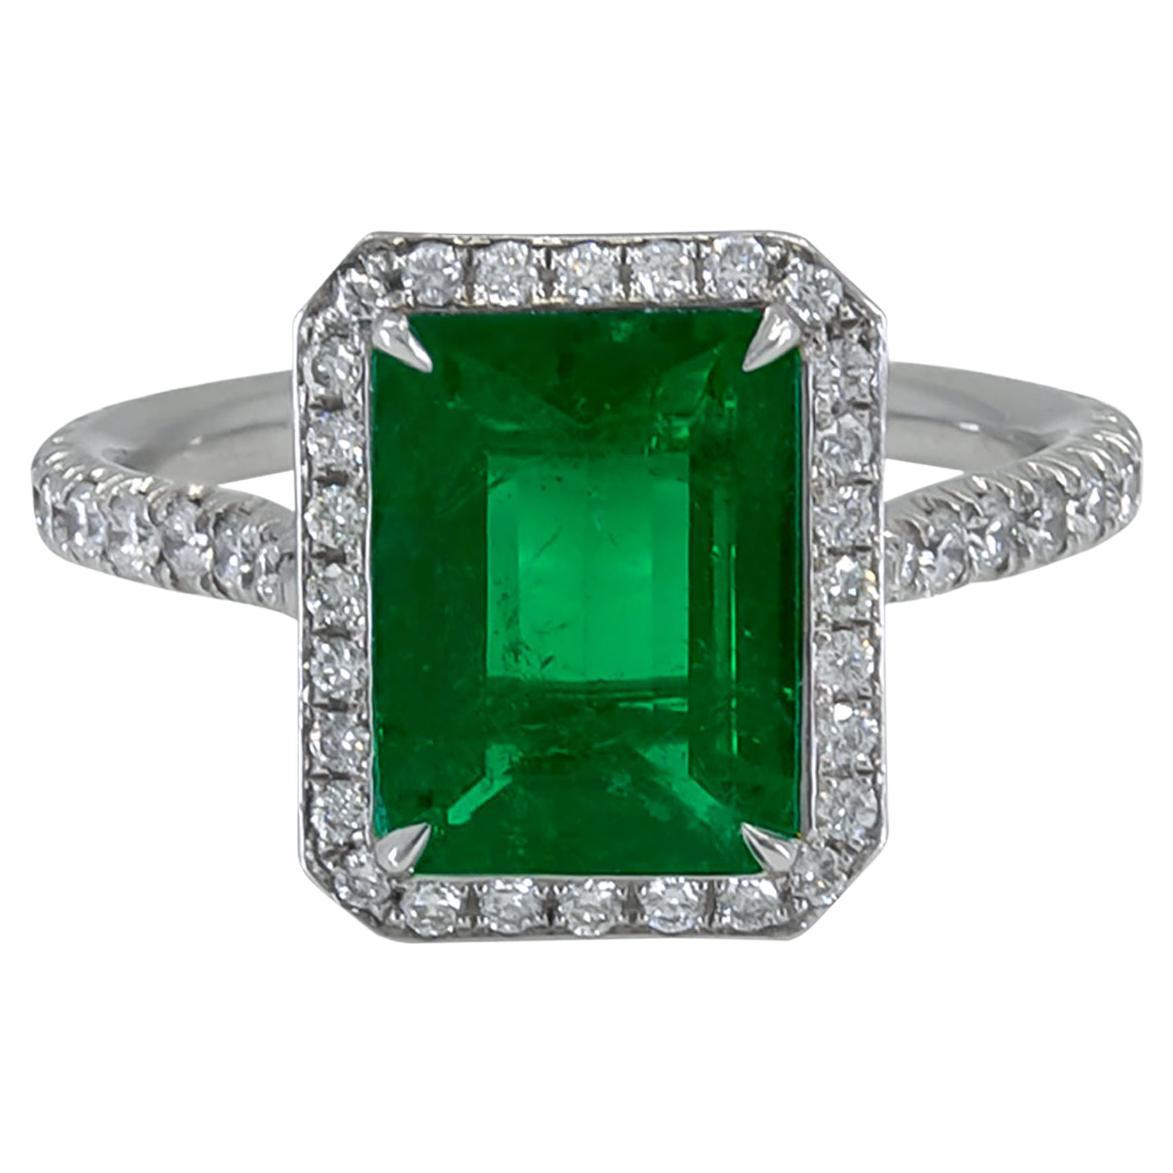 Spectra Fine Jewelry GRS Certified Colombian Emerald Diamond Cocktail Ring